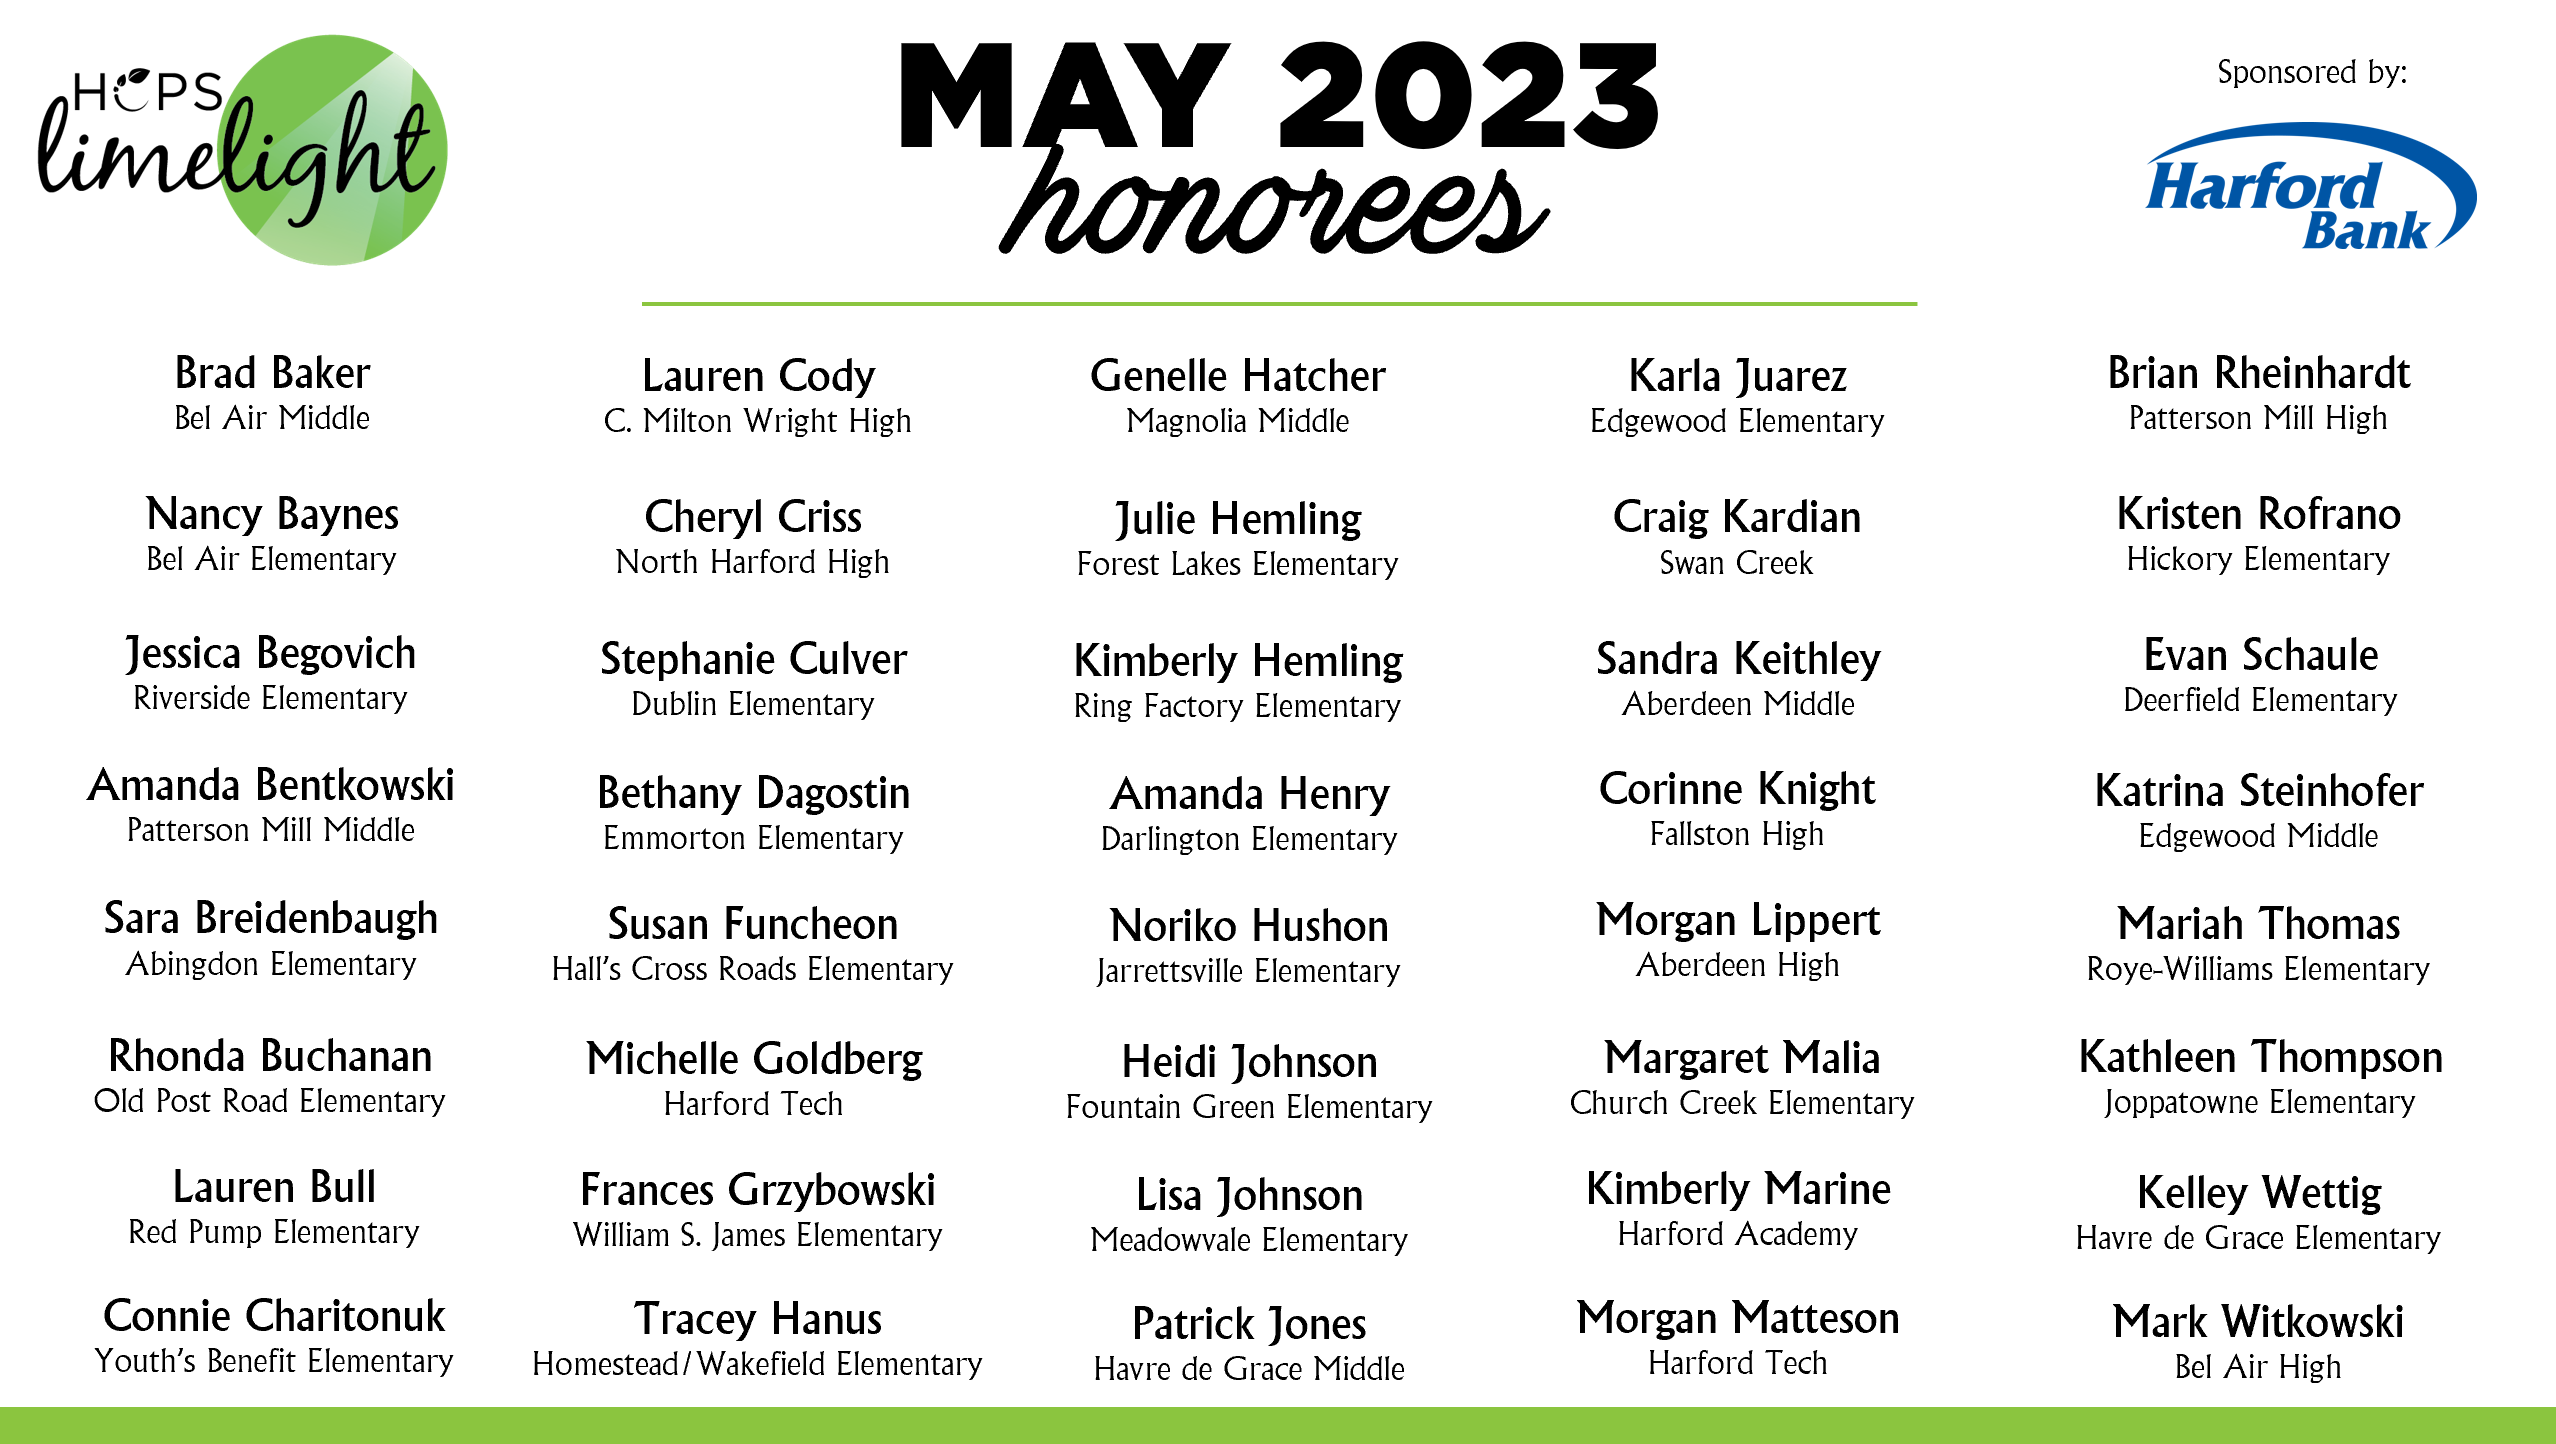 HCPS Limelight Honorees - May 2023